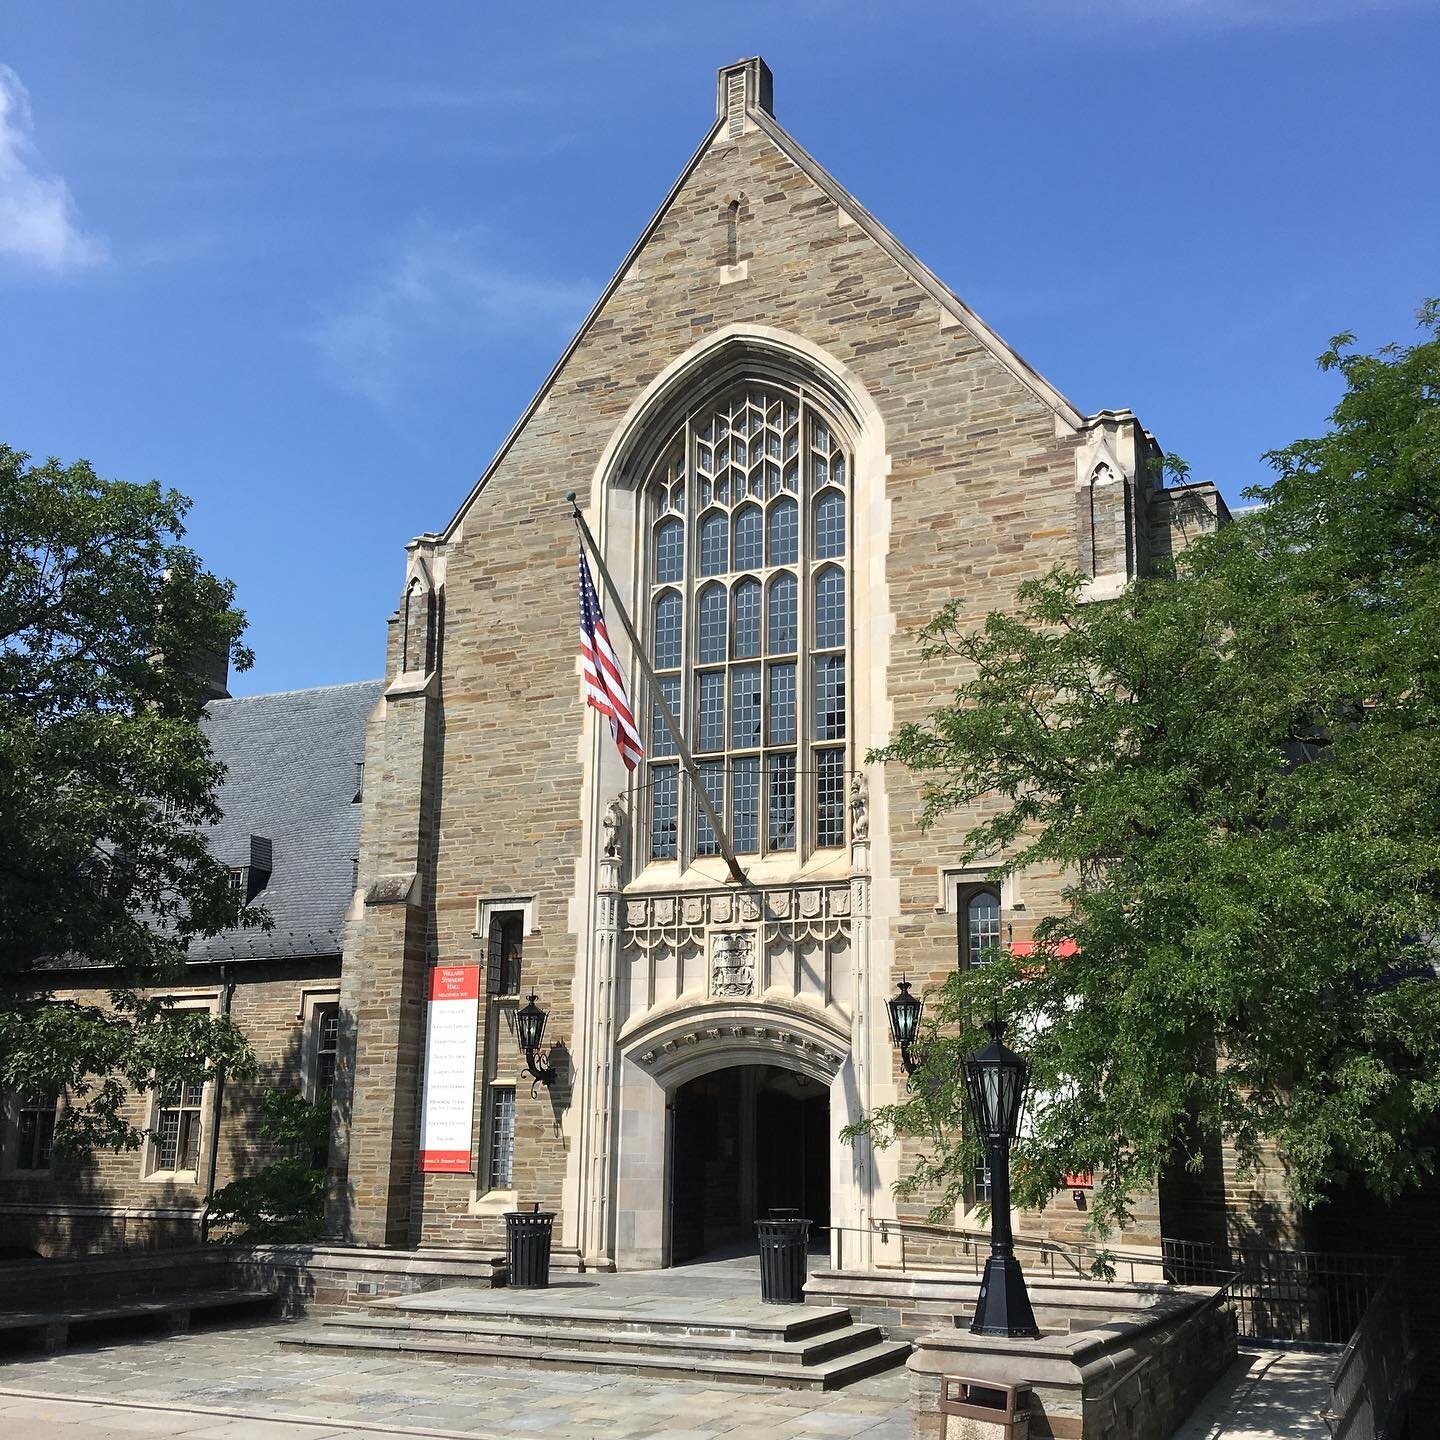 Armchair travel: Willard Straight opened in  November 1925. It was unusual to have a building without academic purpose. It says something about our culture from early on. Hope you have a wonderful day. Stay safe! 
#cornell #studentlife